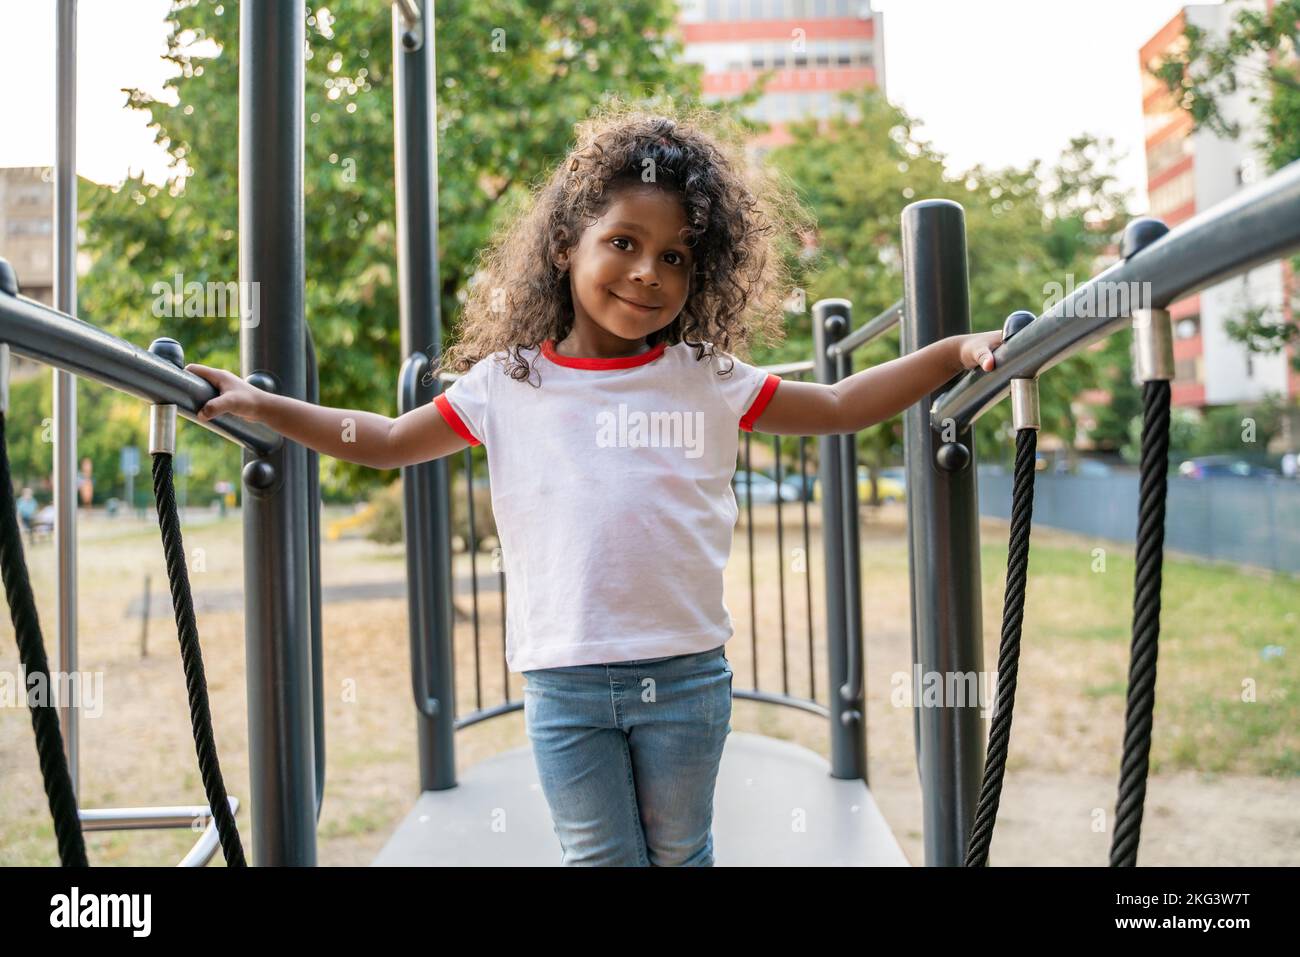 Cute child posing for the camera on the playground Stock Photo